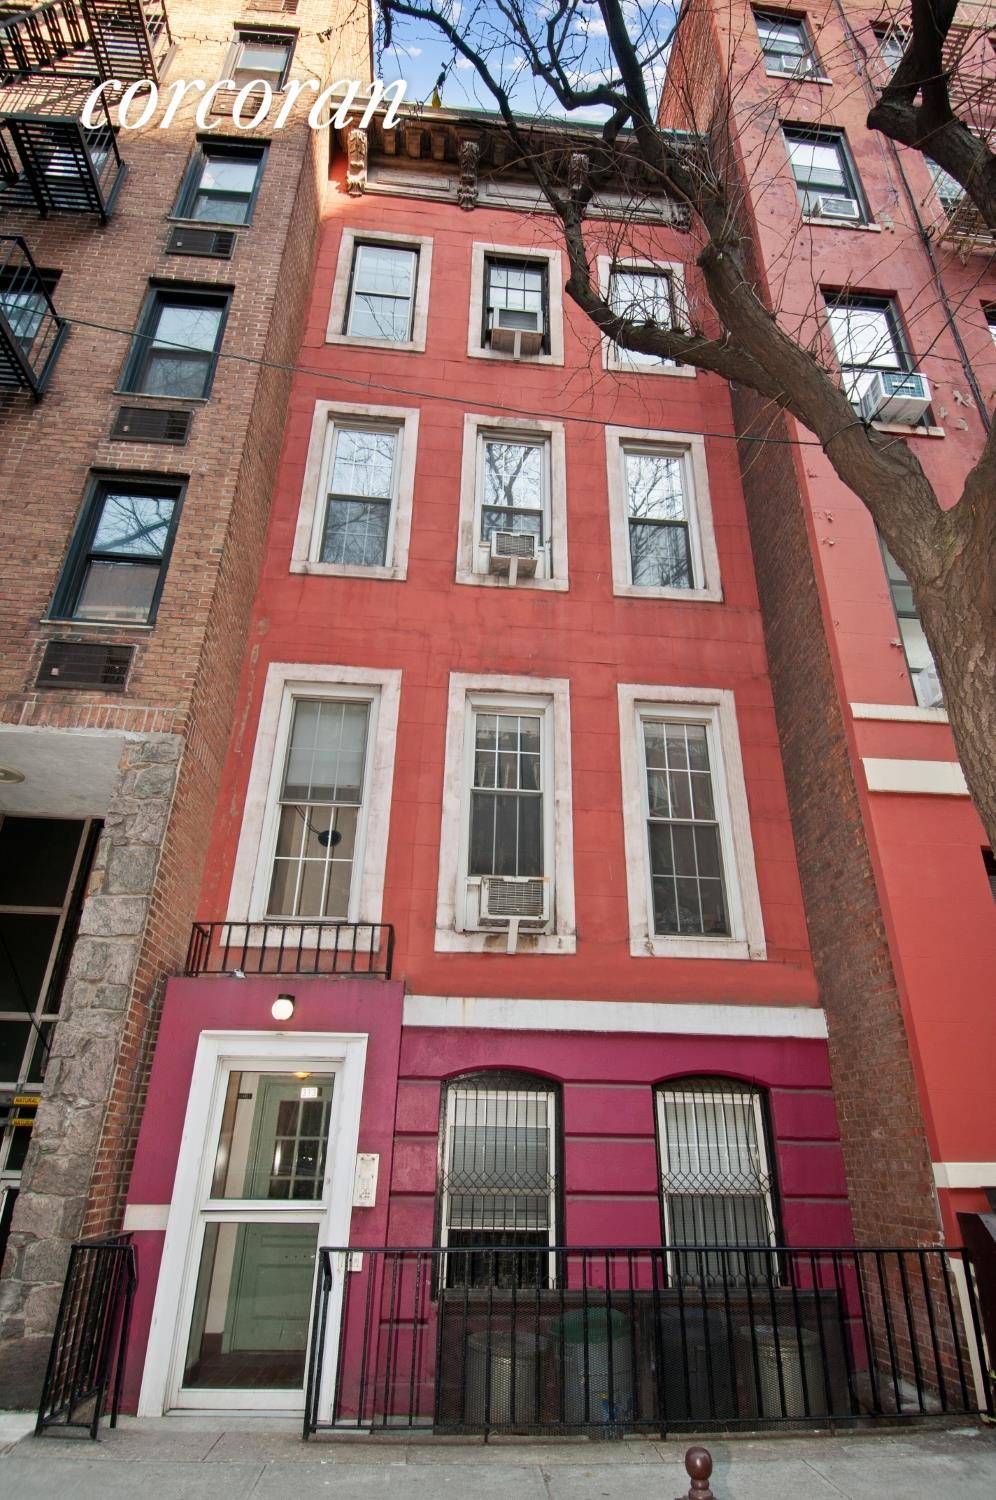 Built circa 1920, this wonderful 4 story multi residential townhouse is located within the heartbeat of NYC's cultural epicenter, on a tree lined residential block, a few blocks from Central ...